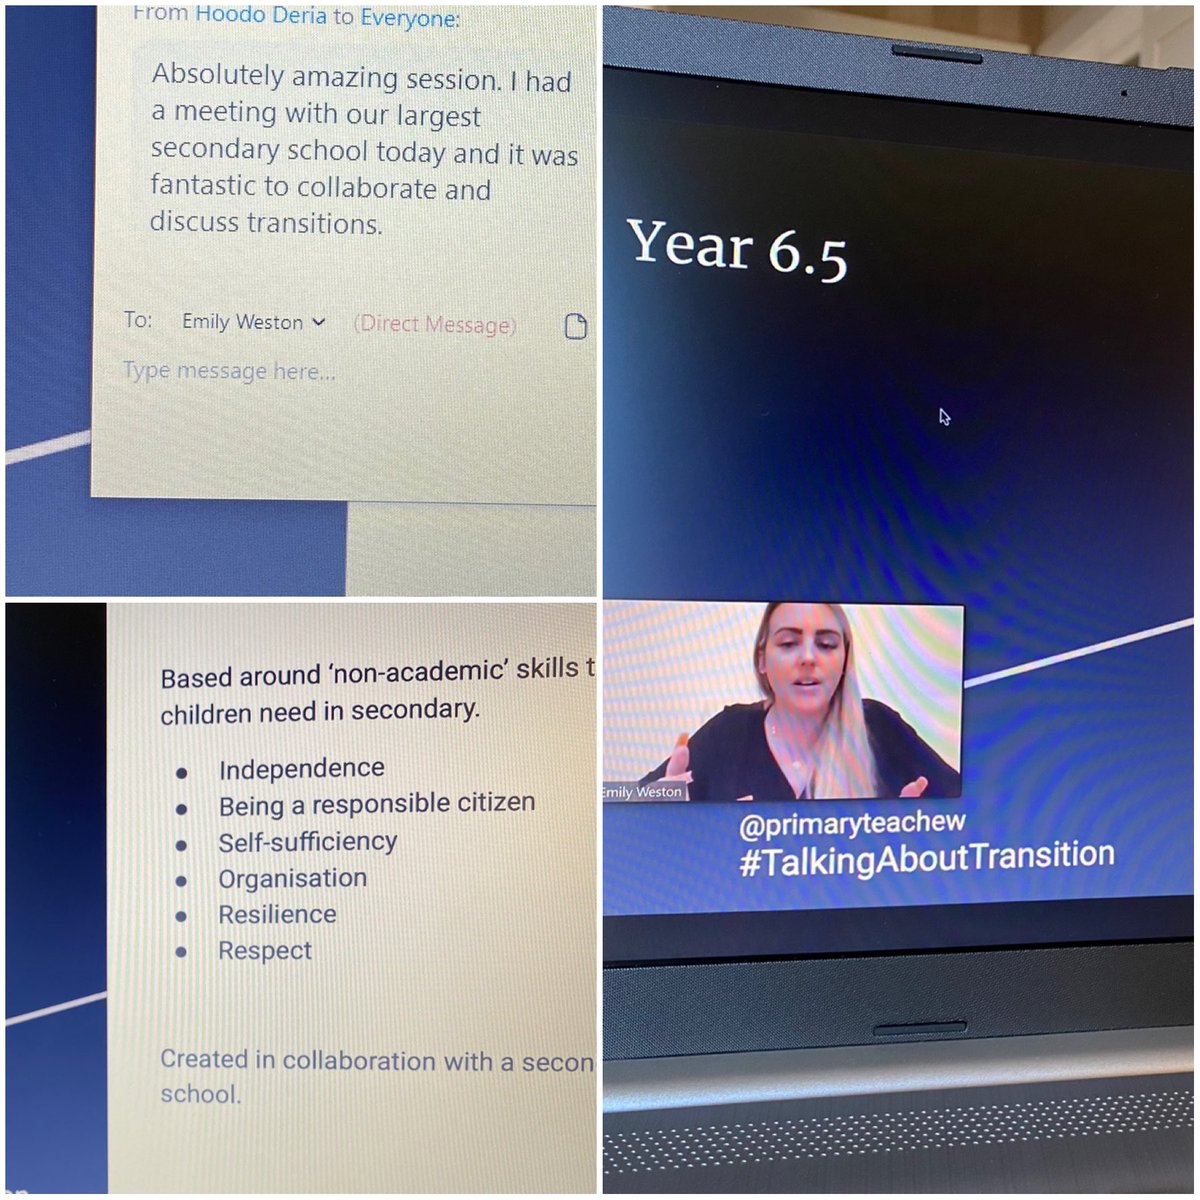 Brilliant session on Yr6-Yr7 #TalkingAboutTransition by Emily Weston @primaryteachew feeling more confident supporting my Yr6s  on their transition journey 😊 Thank You! #Edutwitter #purposefulleadership #connections